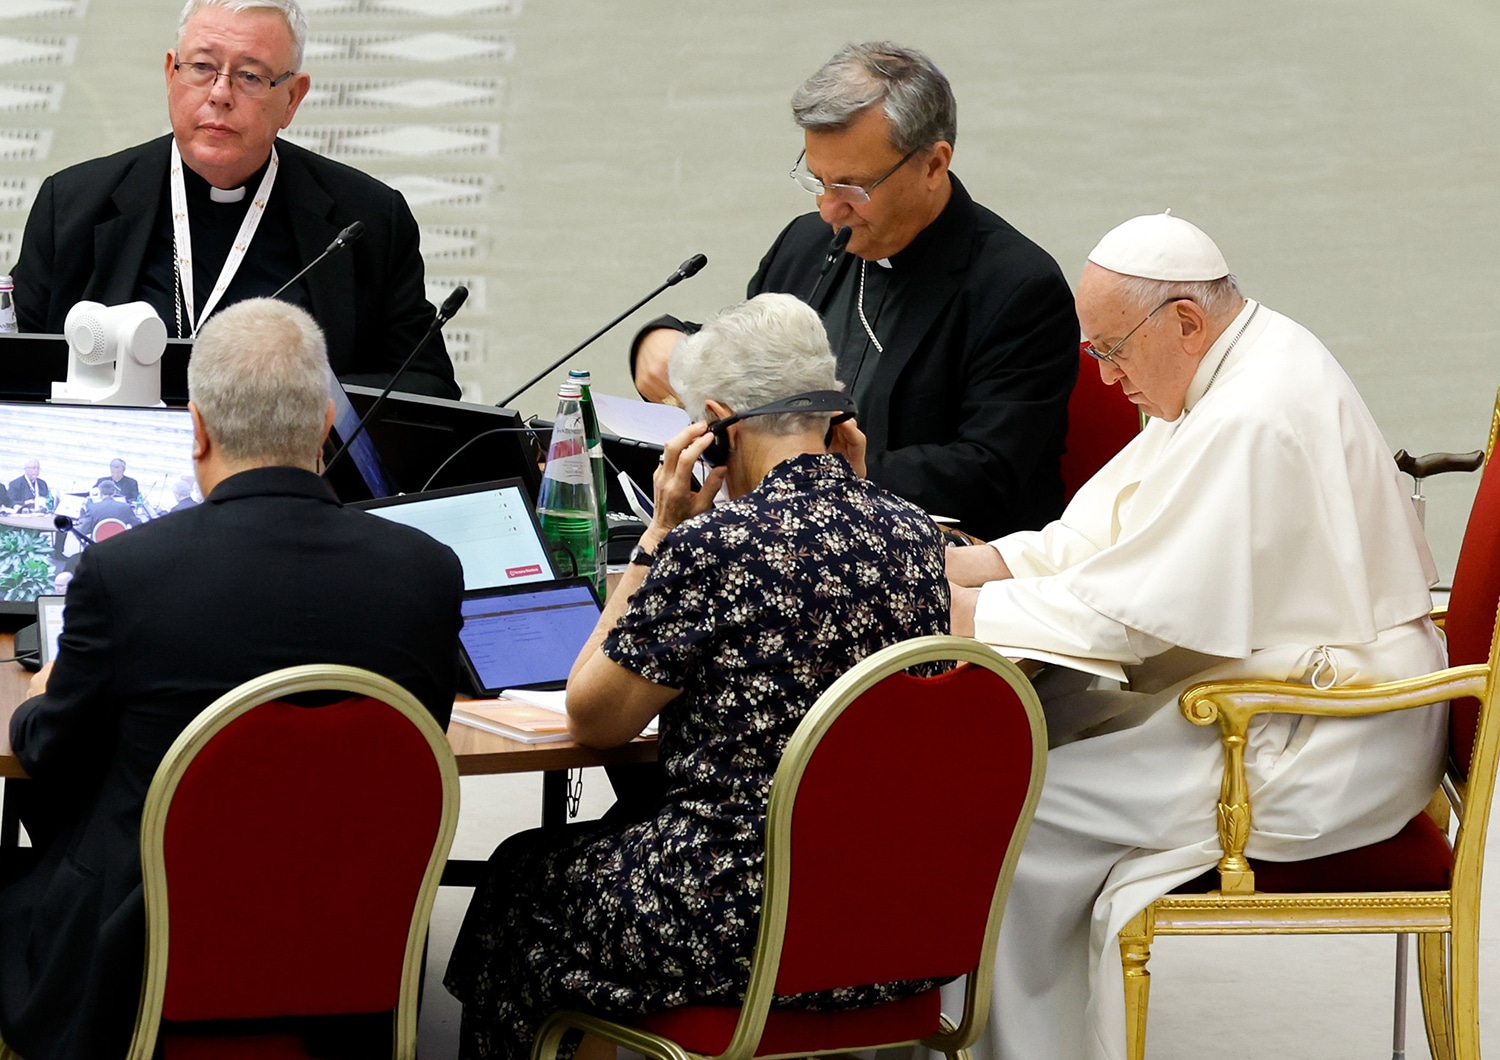 SYNOD MEETING POPE FRANCIS